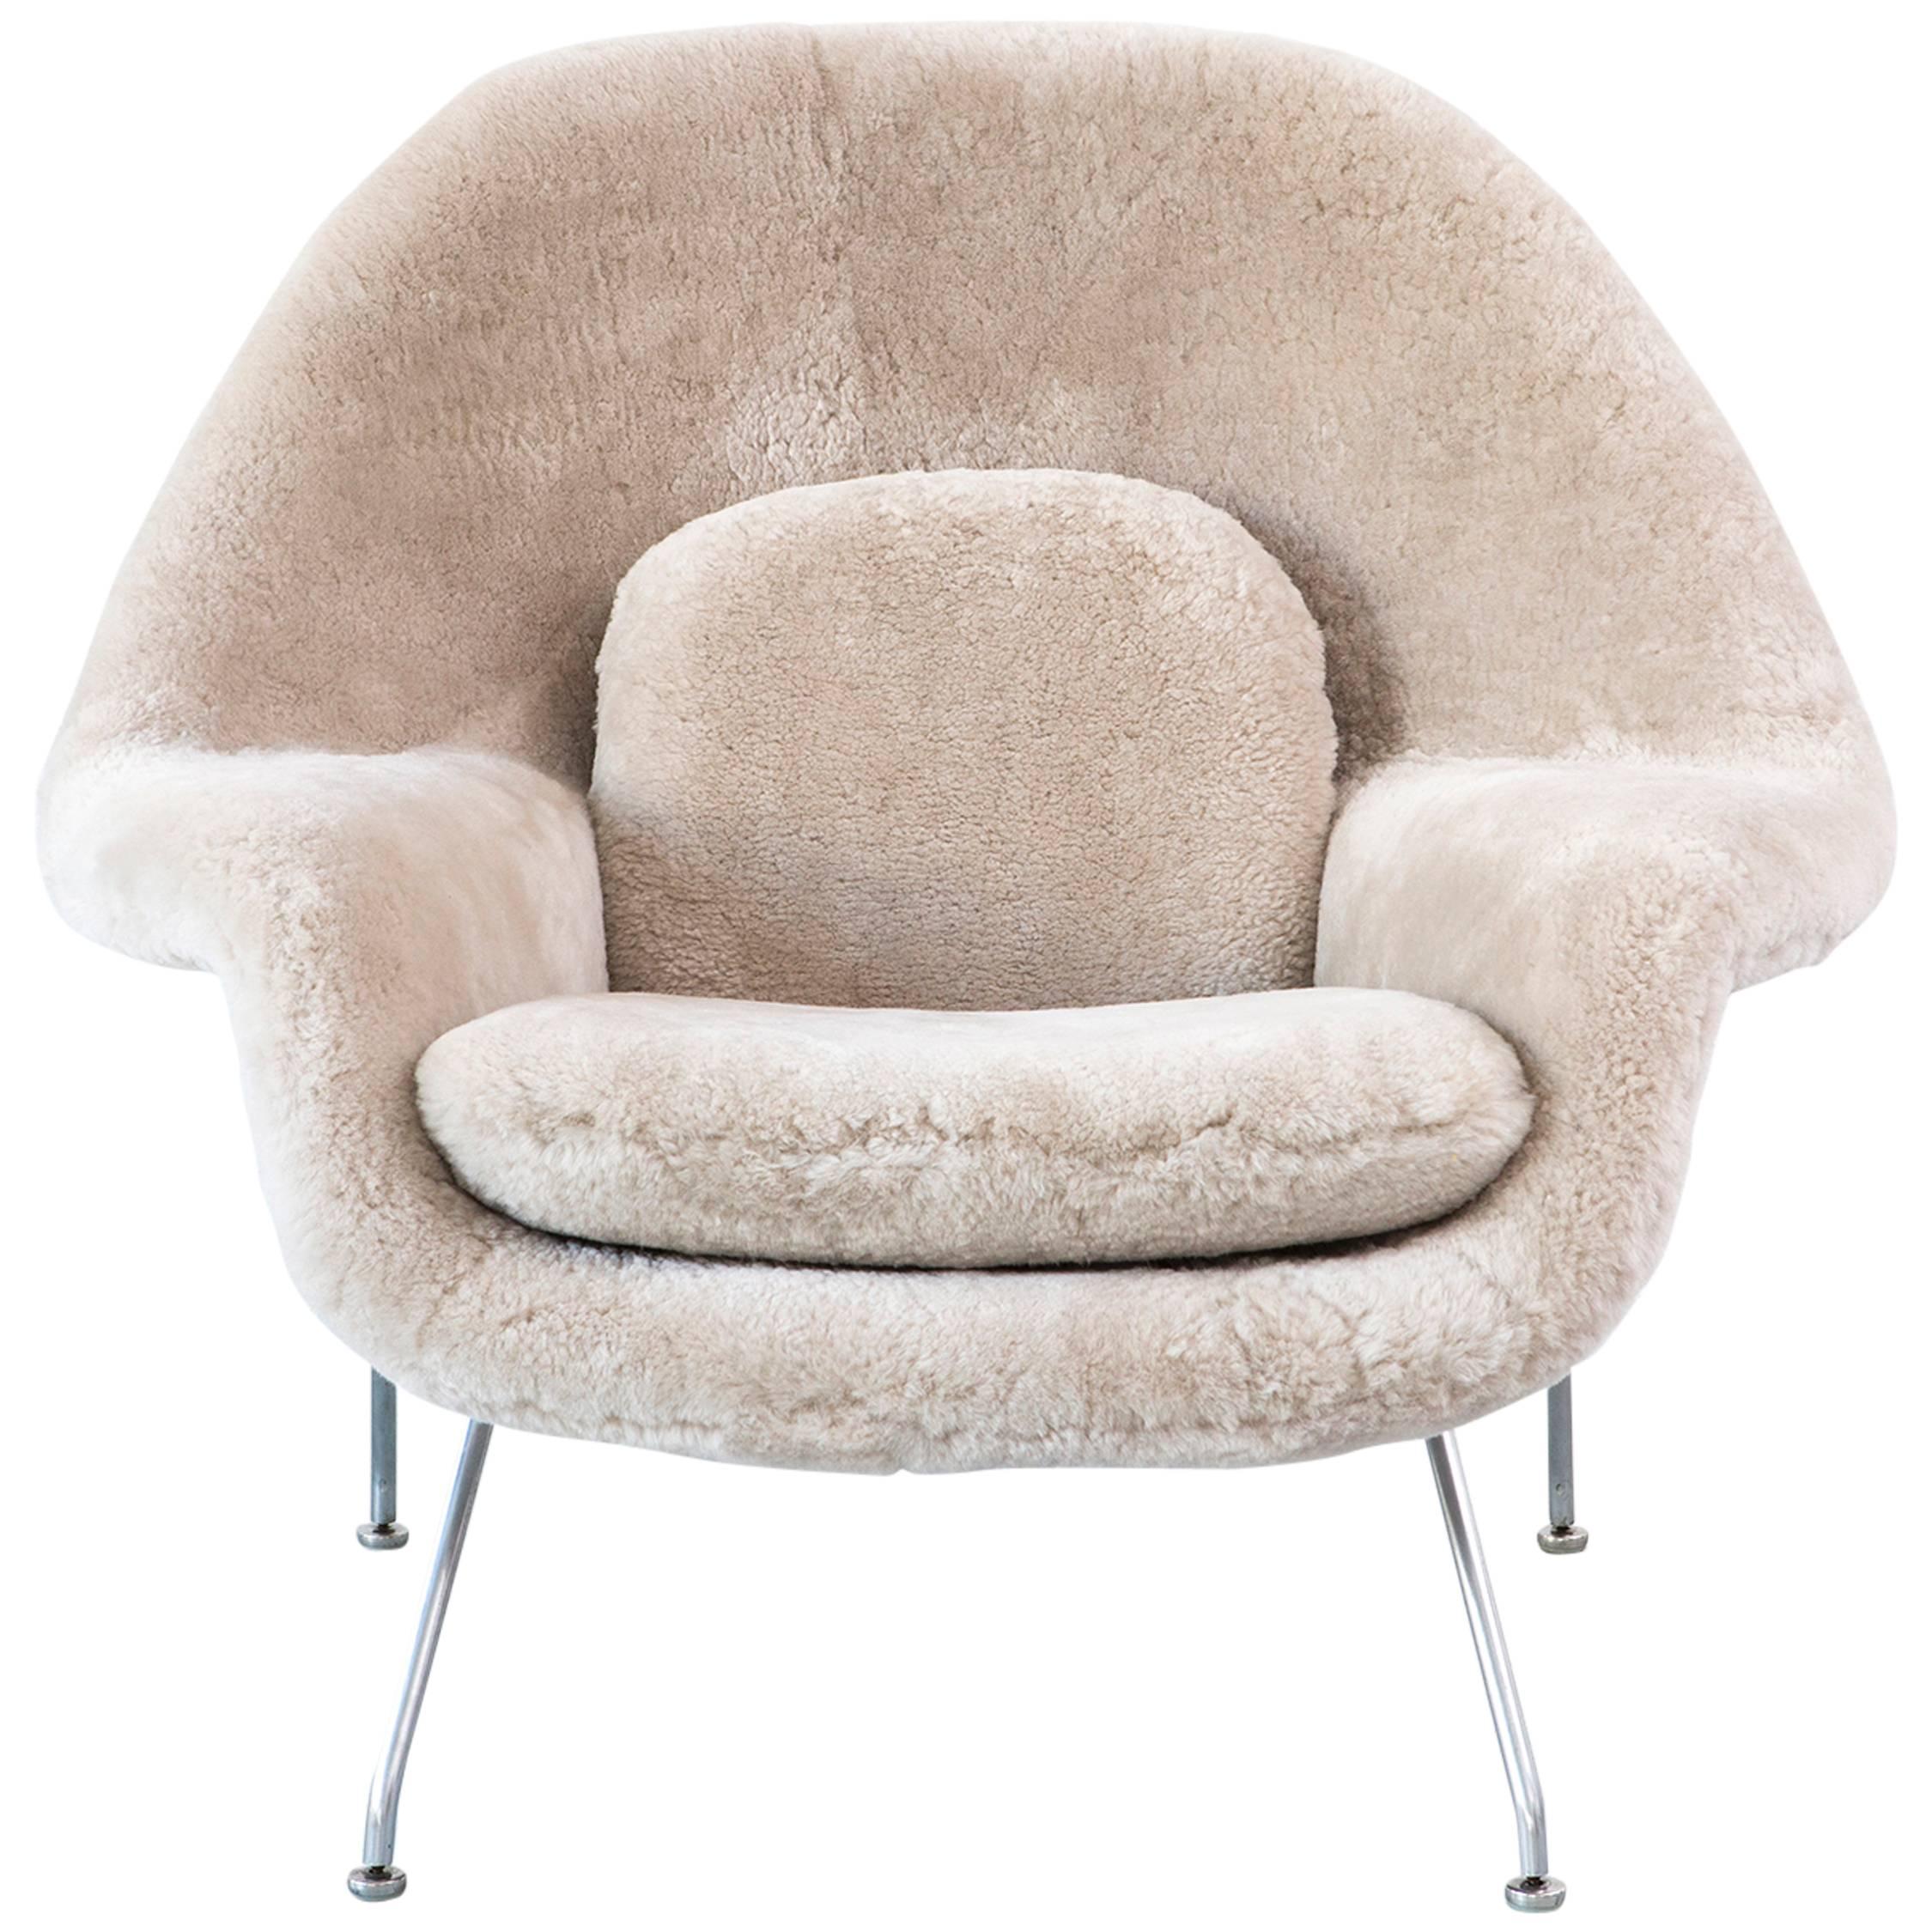 Saarinen Mid-Century Modern Womb Chair by Knoll Reupholstered in Shearling